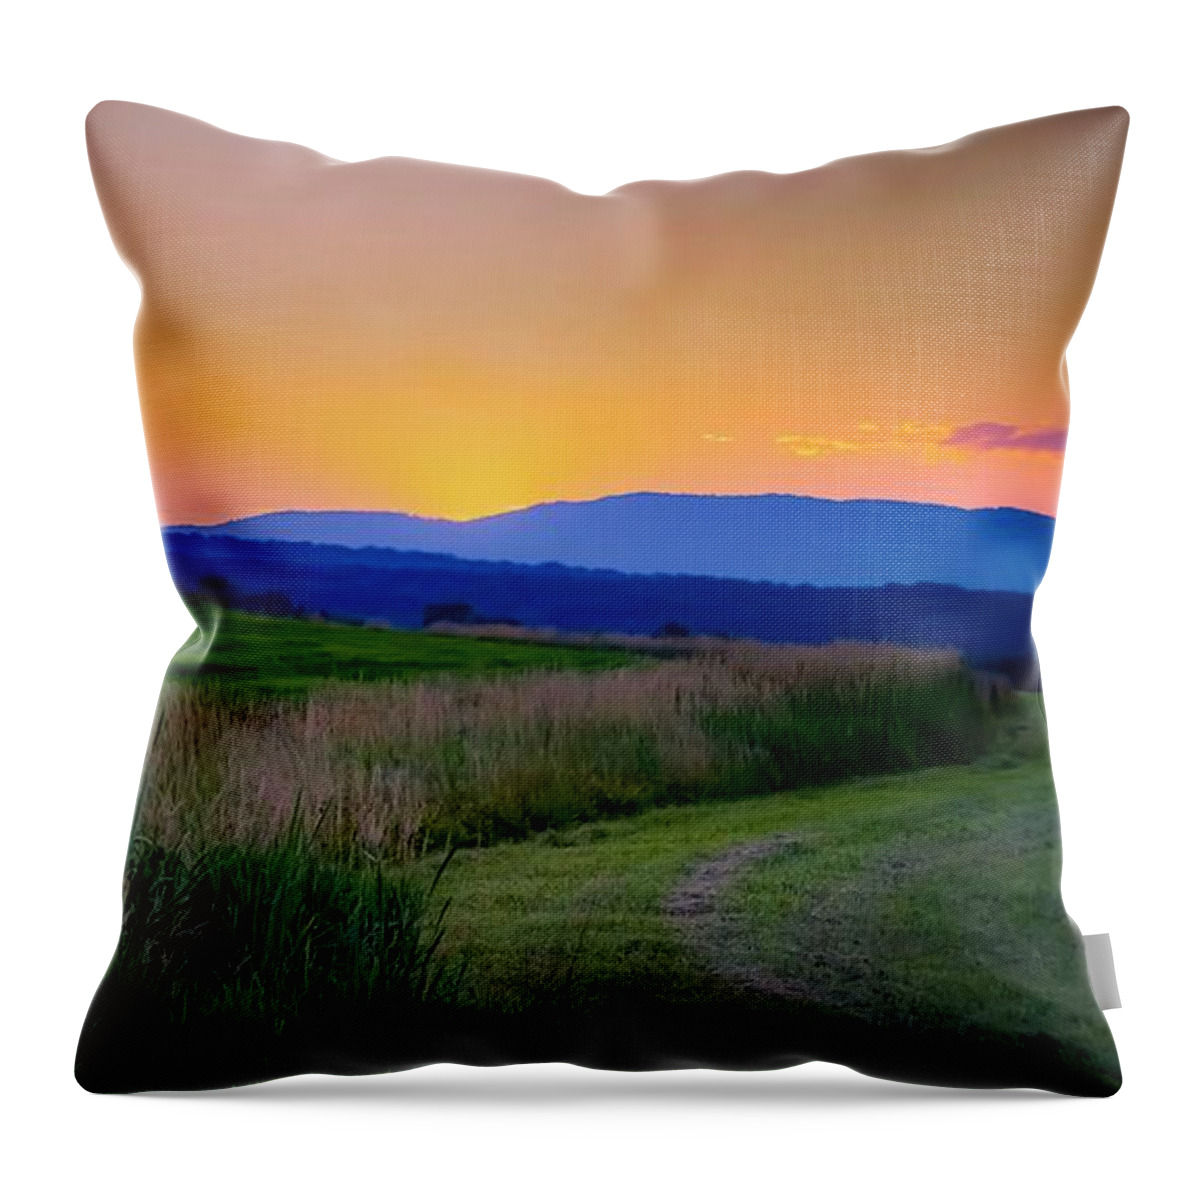  Throw Pillow featuring the photograph Summer Palette by Kendall McKernon